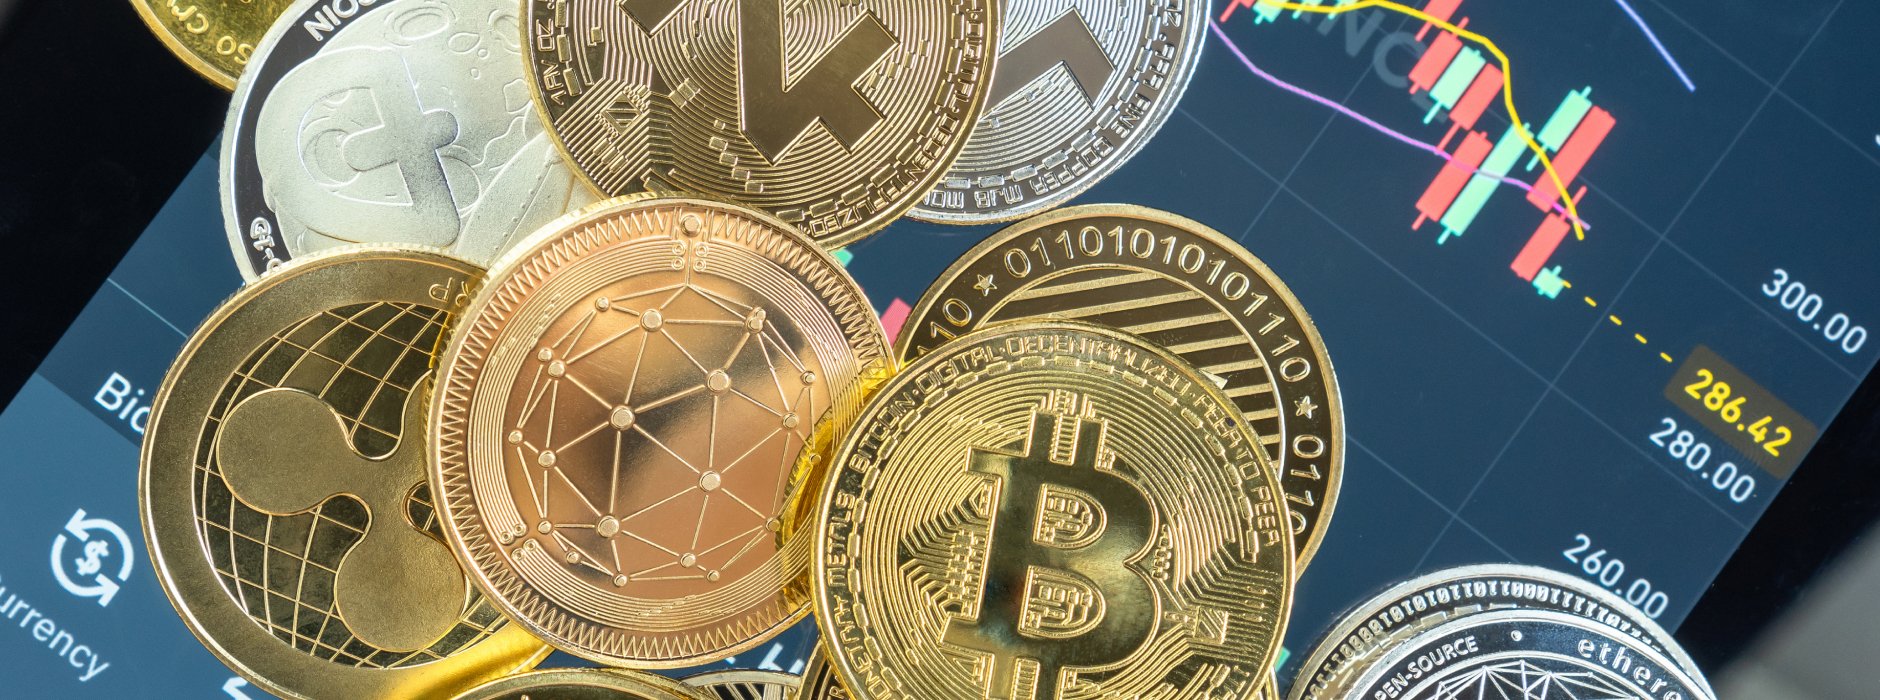 multiple golden crypto coins in front of a mobile device showing a crypto chart